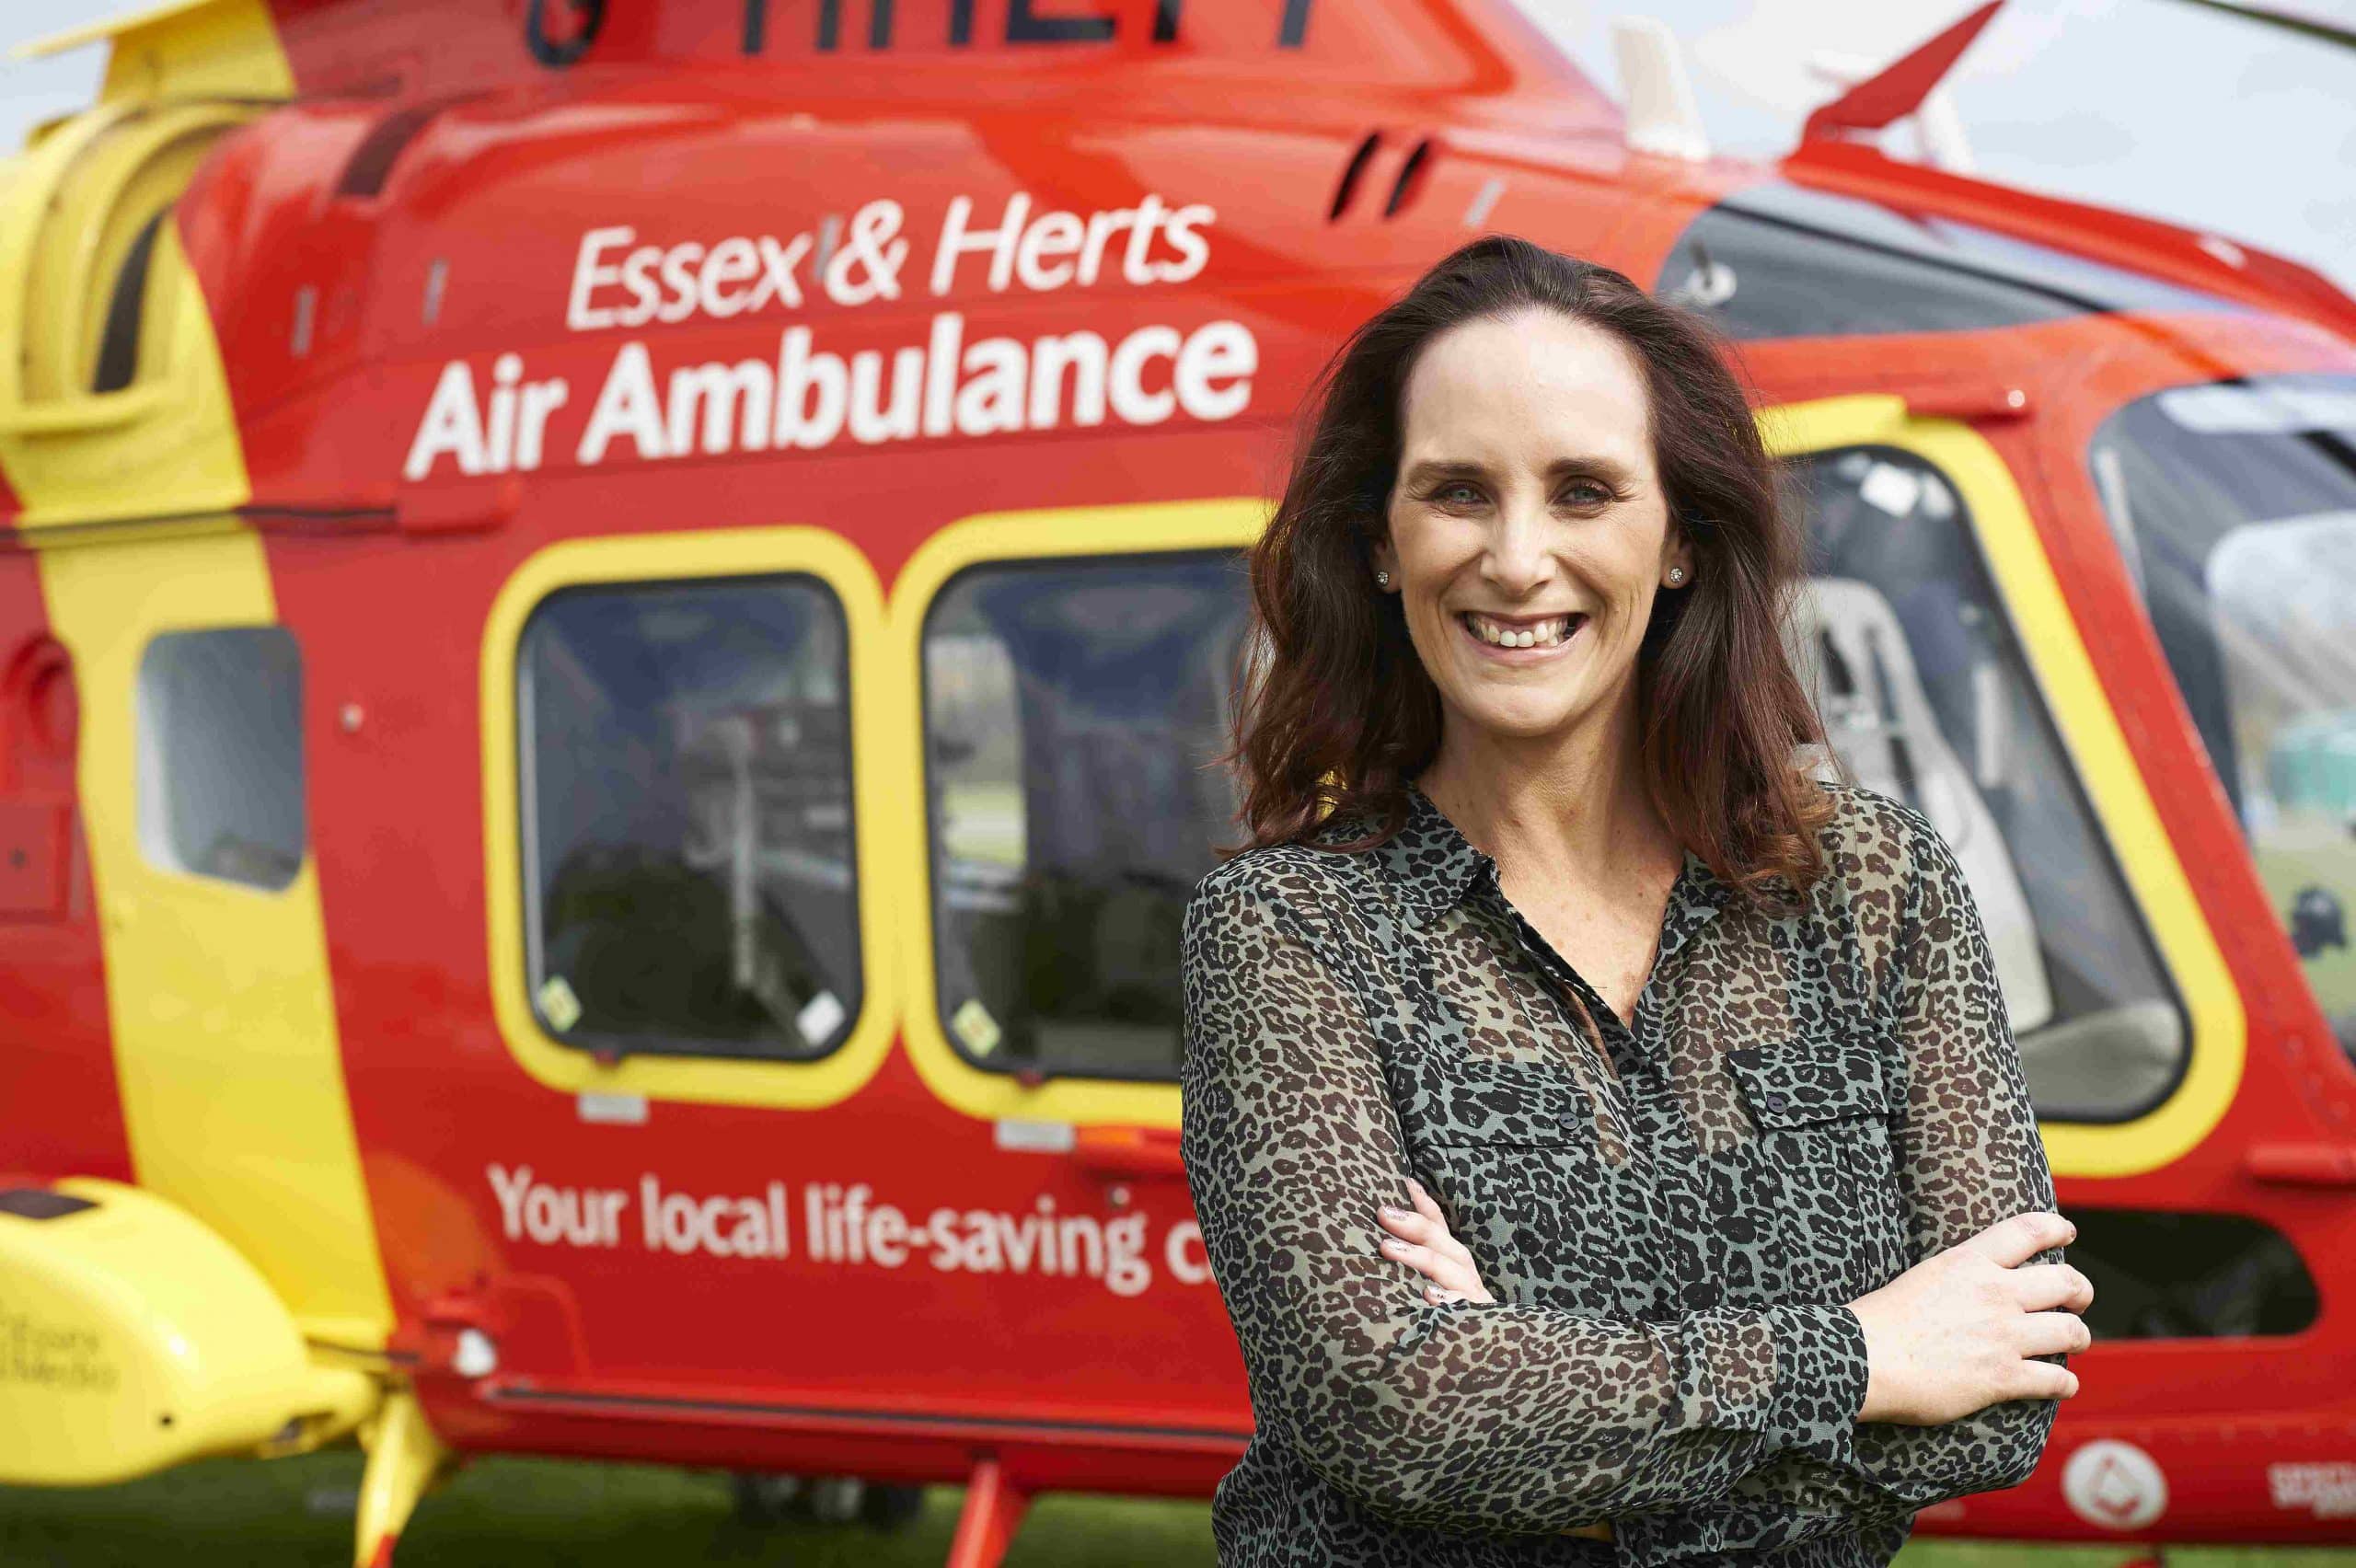 Essex & Herts Air Ambulance to receive cash boost from Government